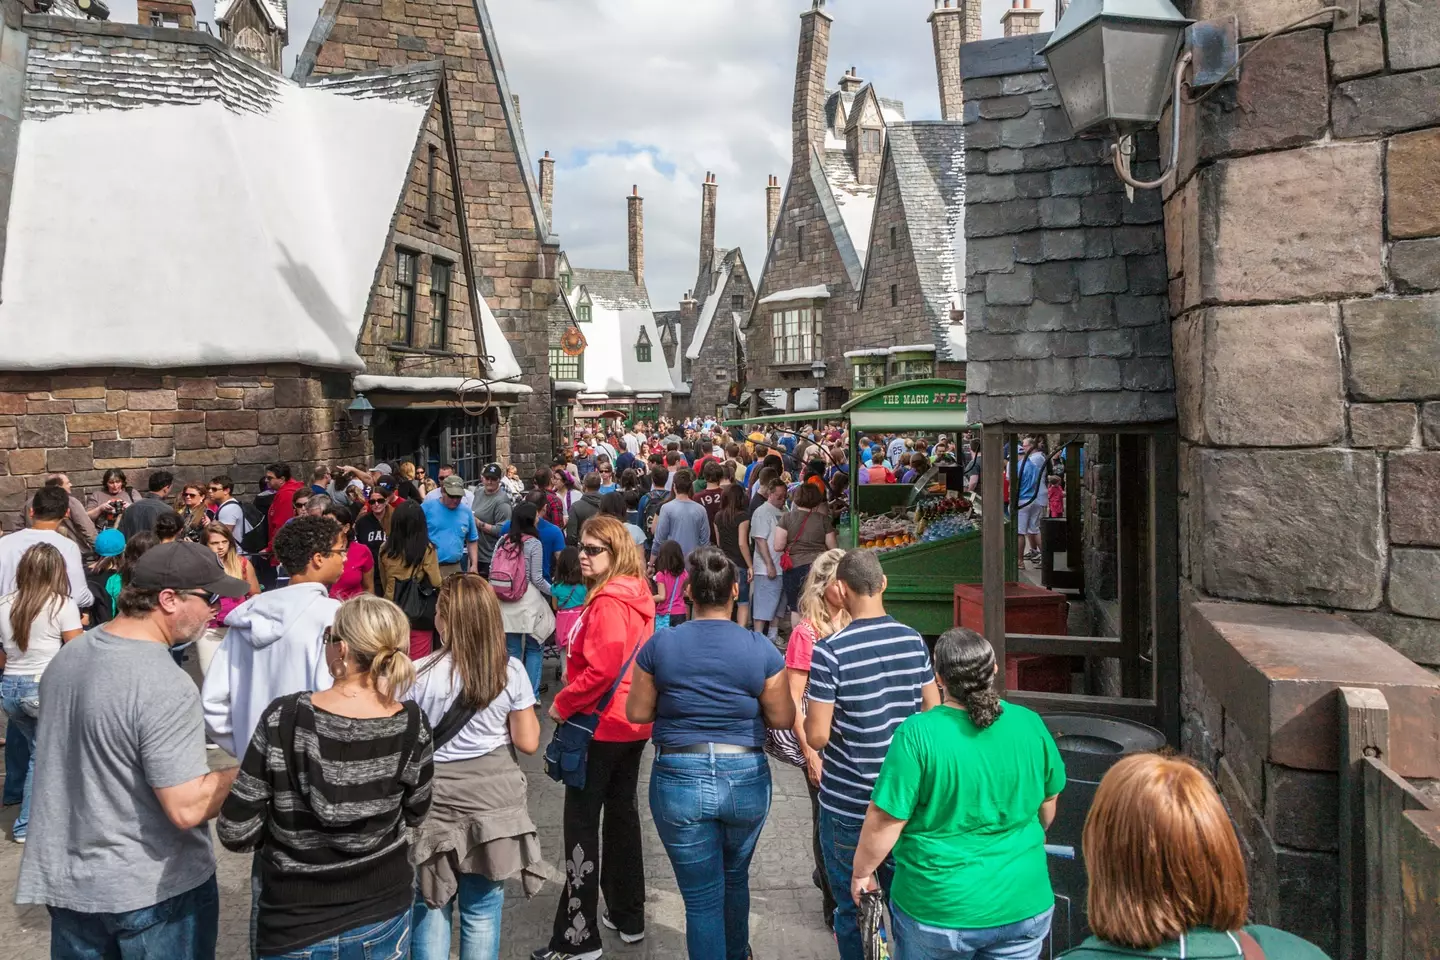 Potterheads will feel the pinch after visiting the Wizarding World.